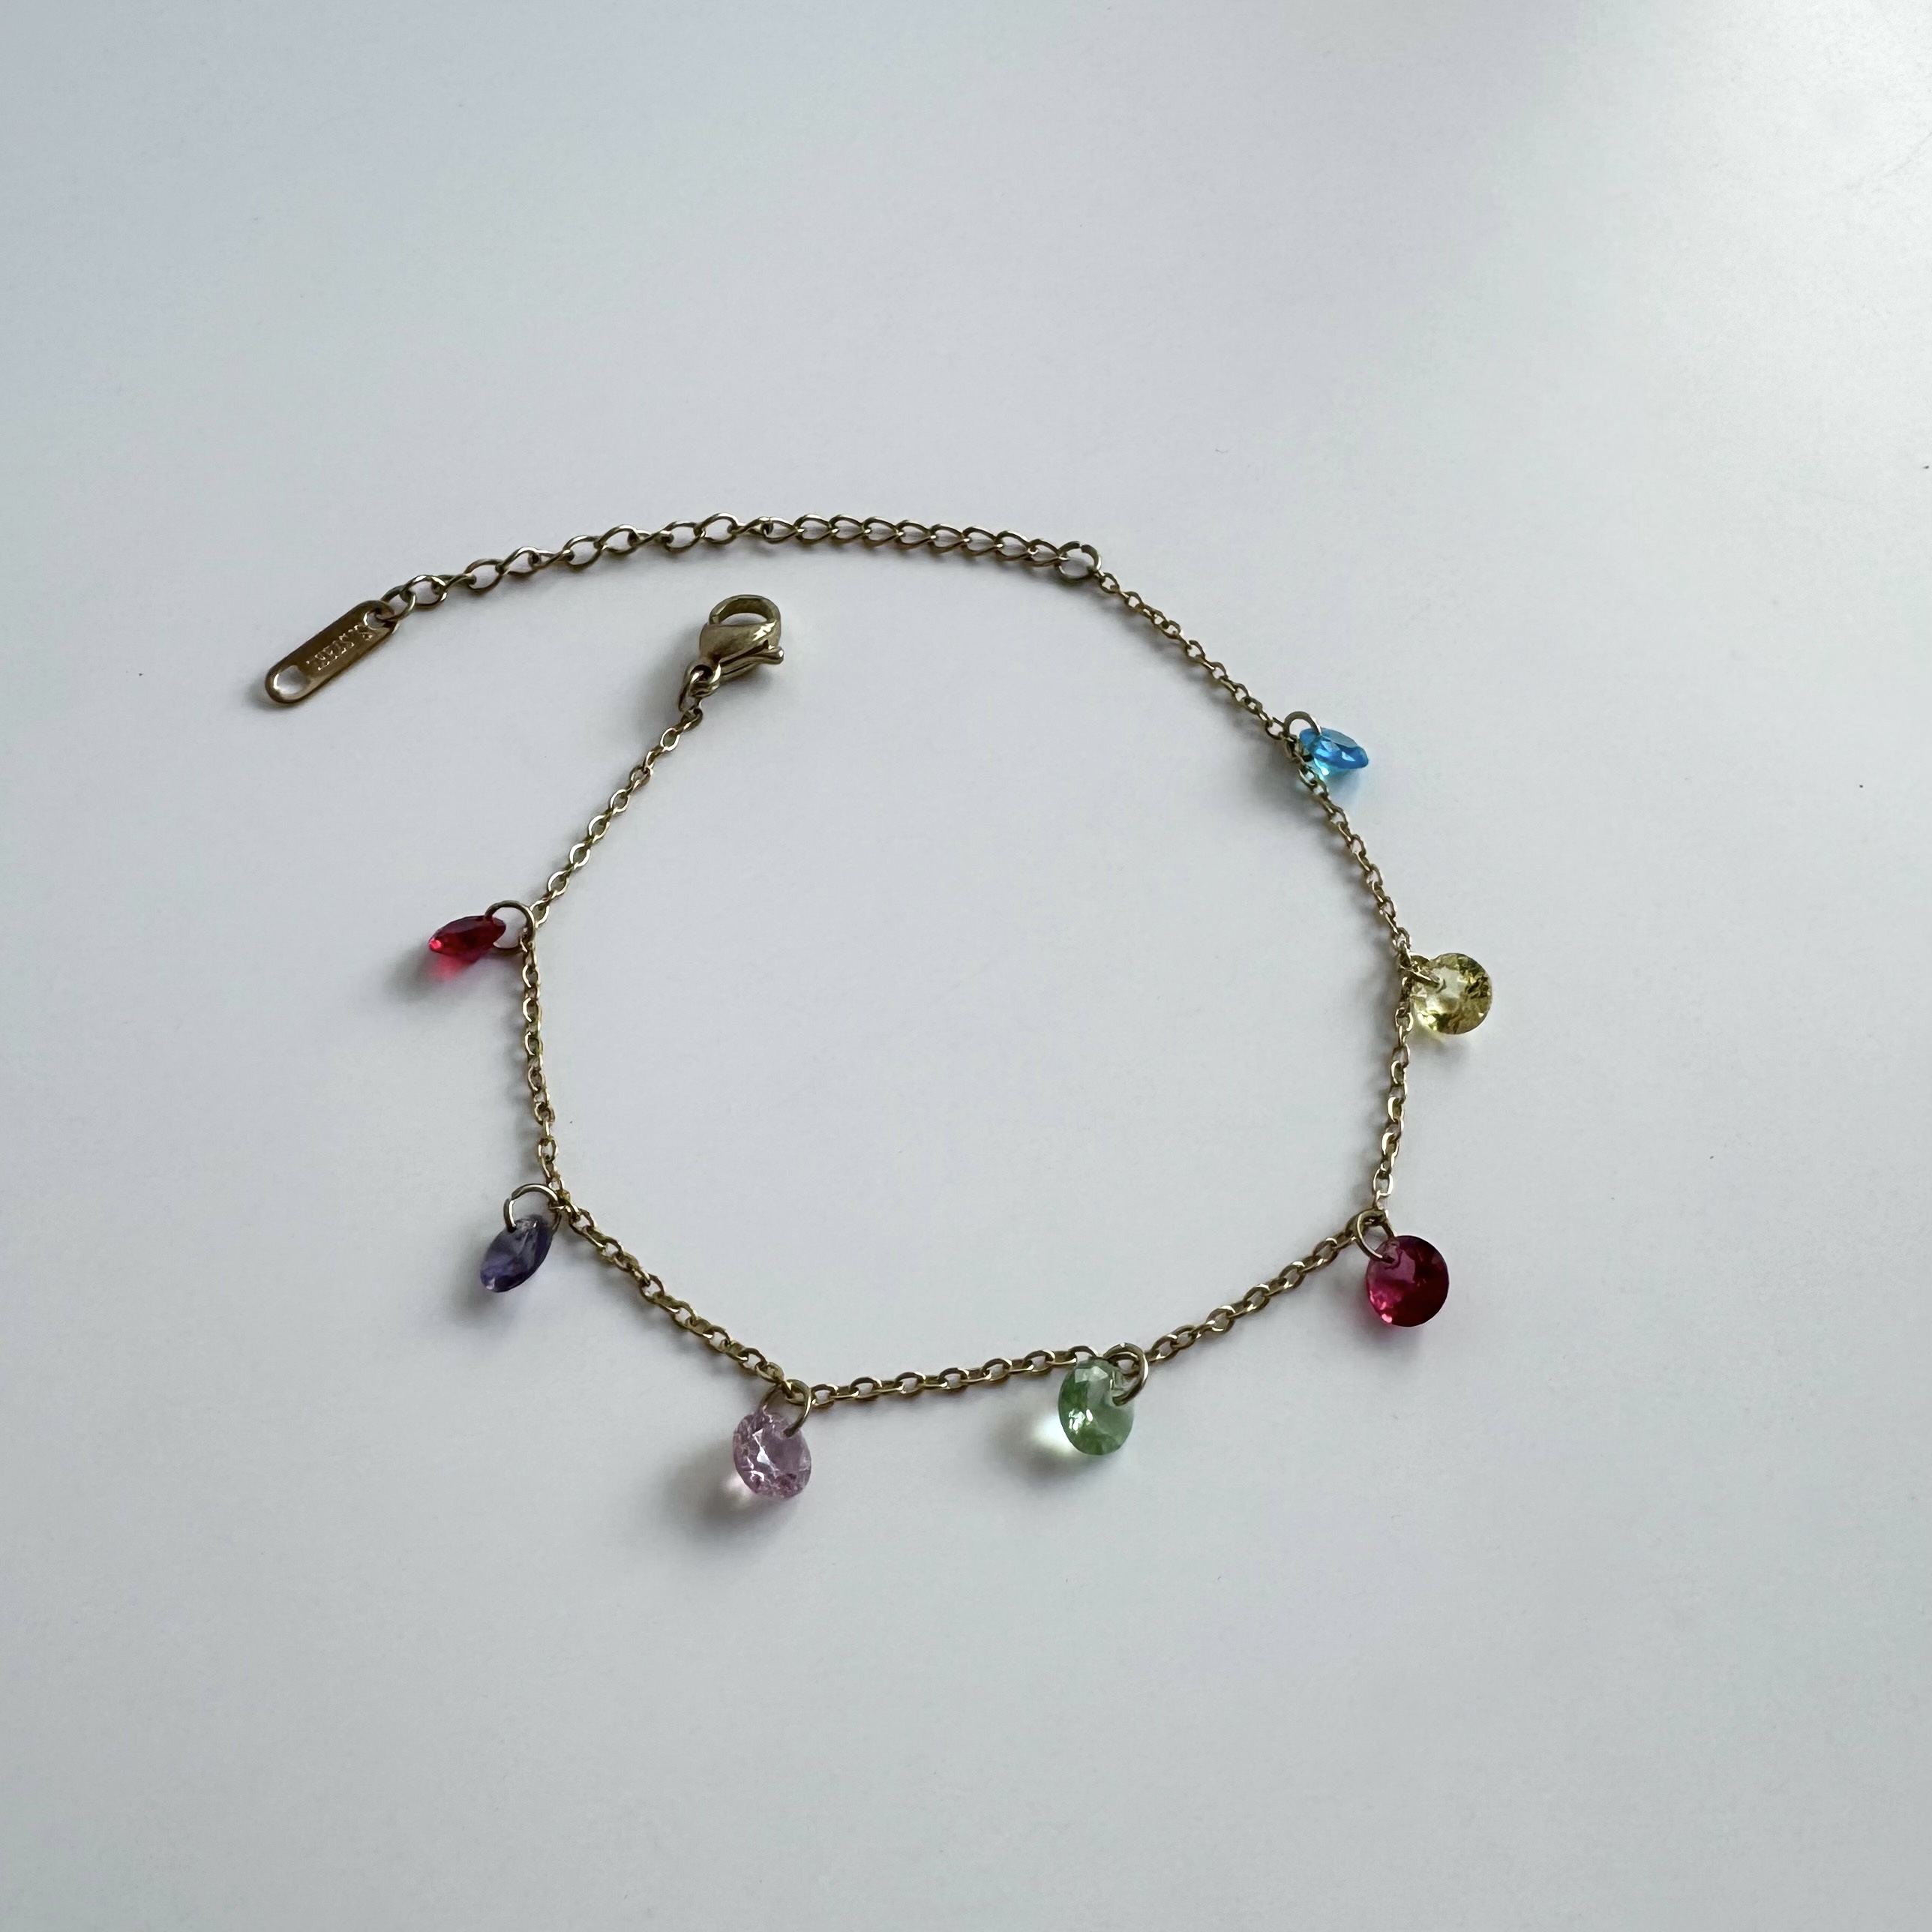 a necklace with colorful stones